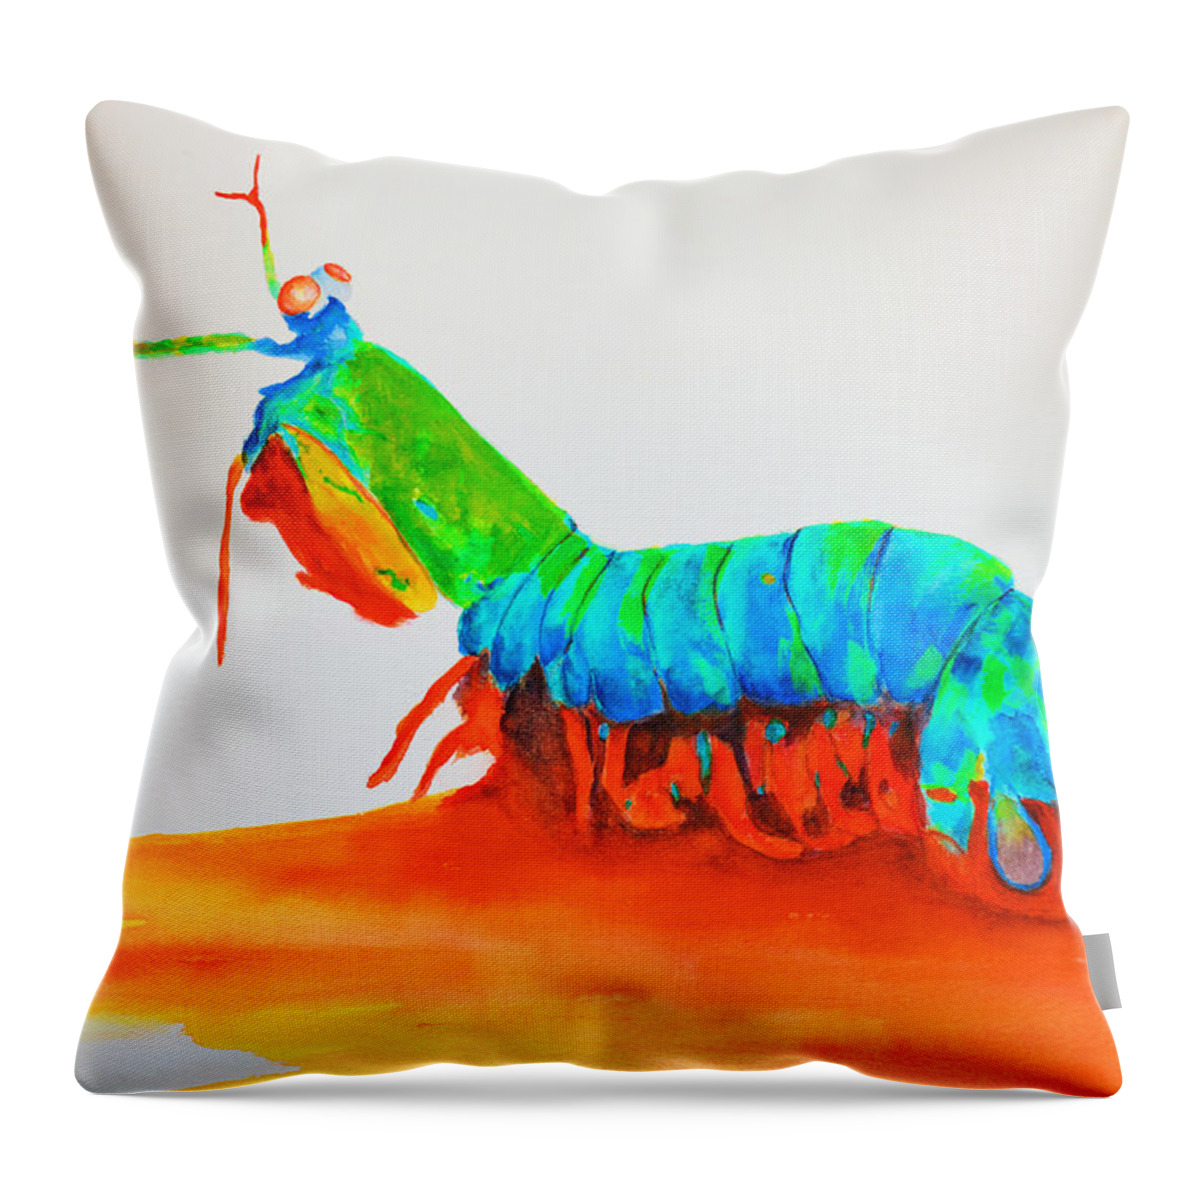 Blue Throw Pillow featuring the painting Mantis Shrimp by Ken Figurski